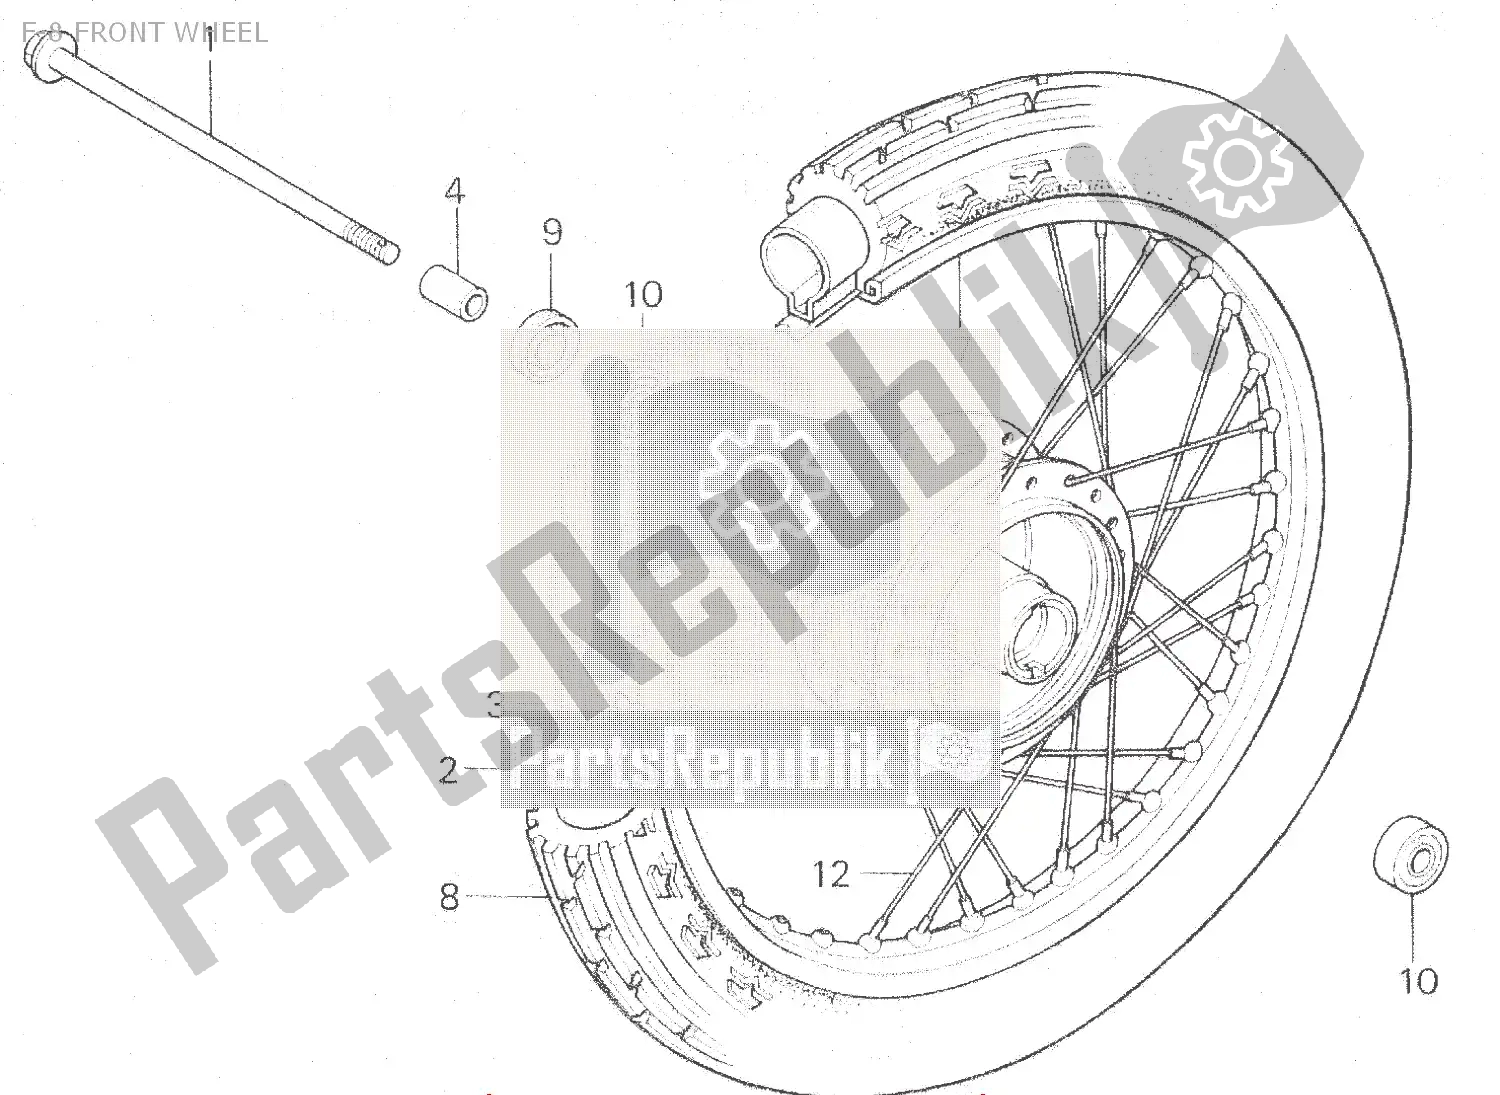 All parts for the F-8 Front Wheel of the Honda MB 100 1980